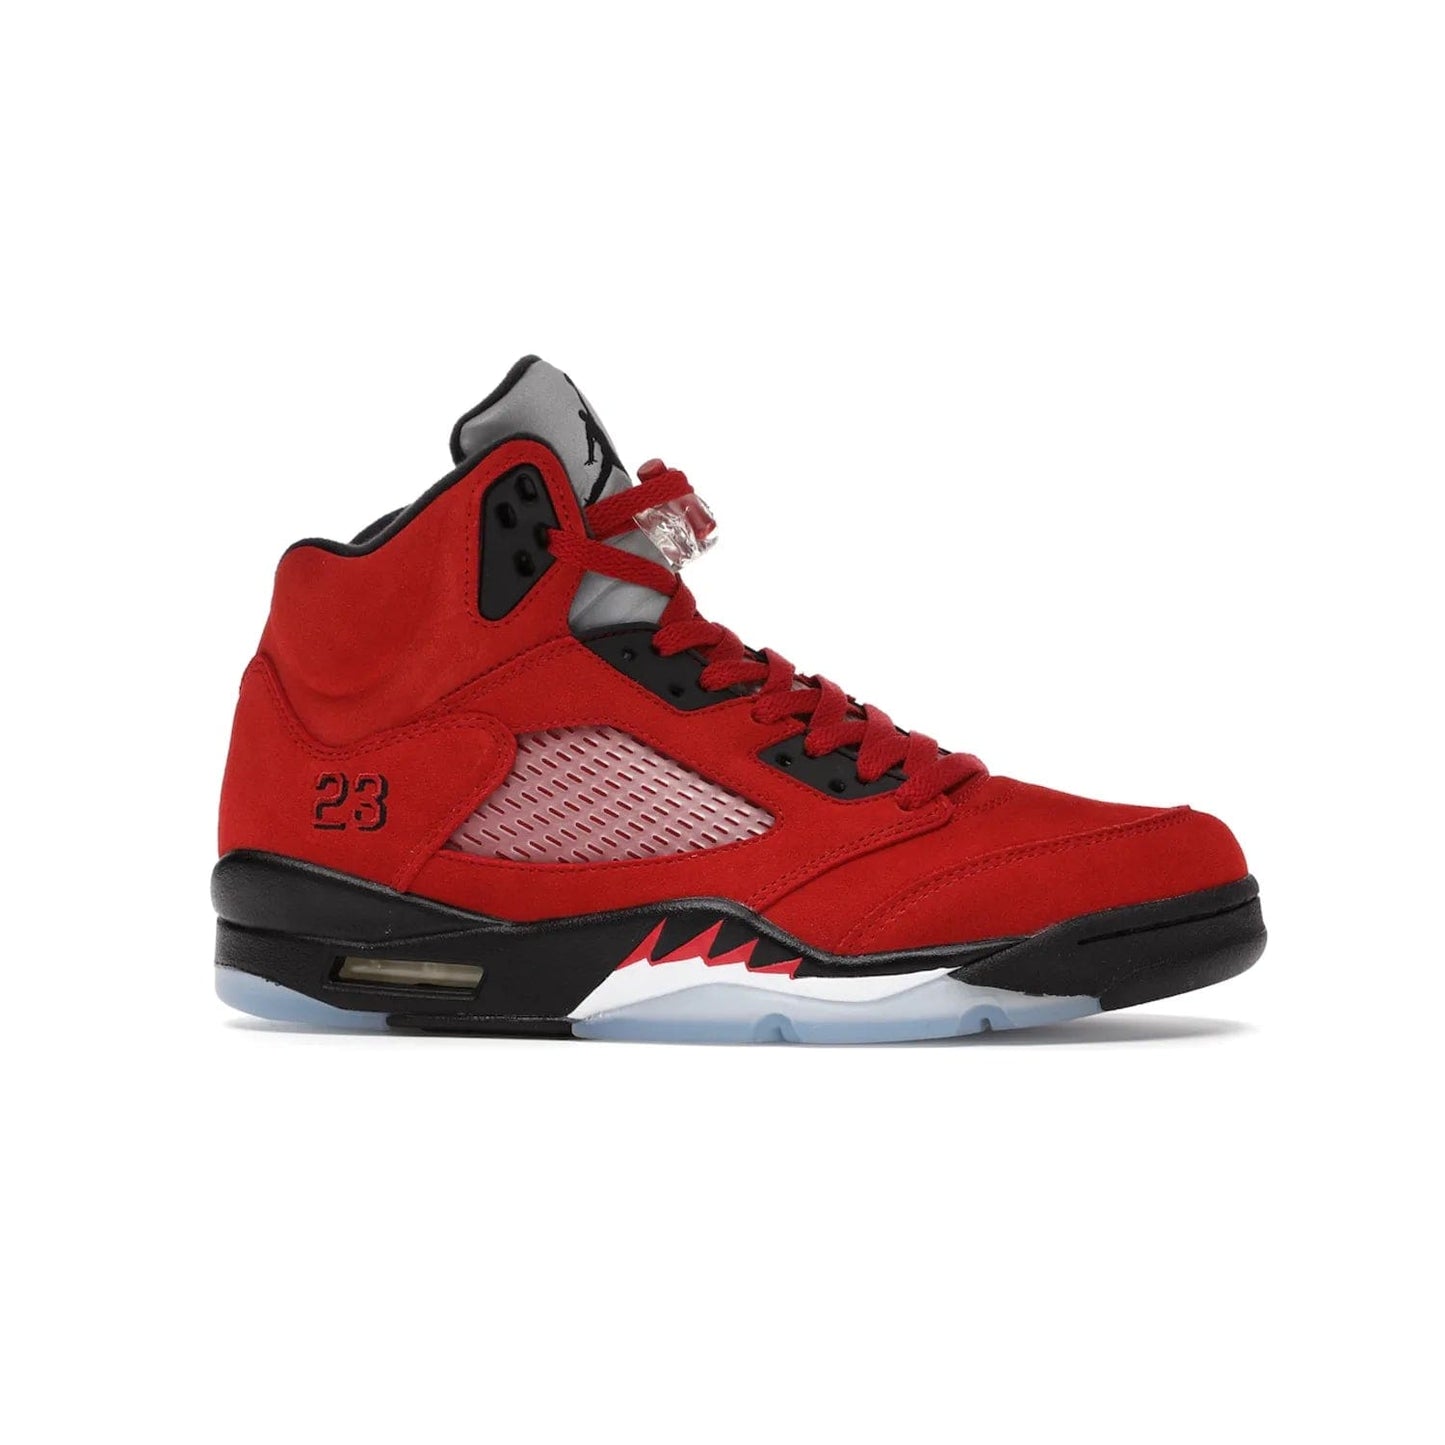 Jordan 5 Retro Raging Bull Red (2021) - Image 2 - Only at www.BallersClubKickz.com - Get ready for the 2021 stand-alone release of the Air Jordan 5 Raging Bulls! This all-suede upper combines luxe details like a Jumpman logo, red & black "23" embroidery and shark tooth detailing, atop a black midsole. Don't miss out - release date in April 2021 for $190.